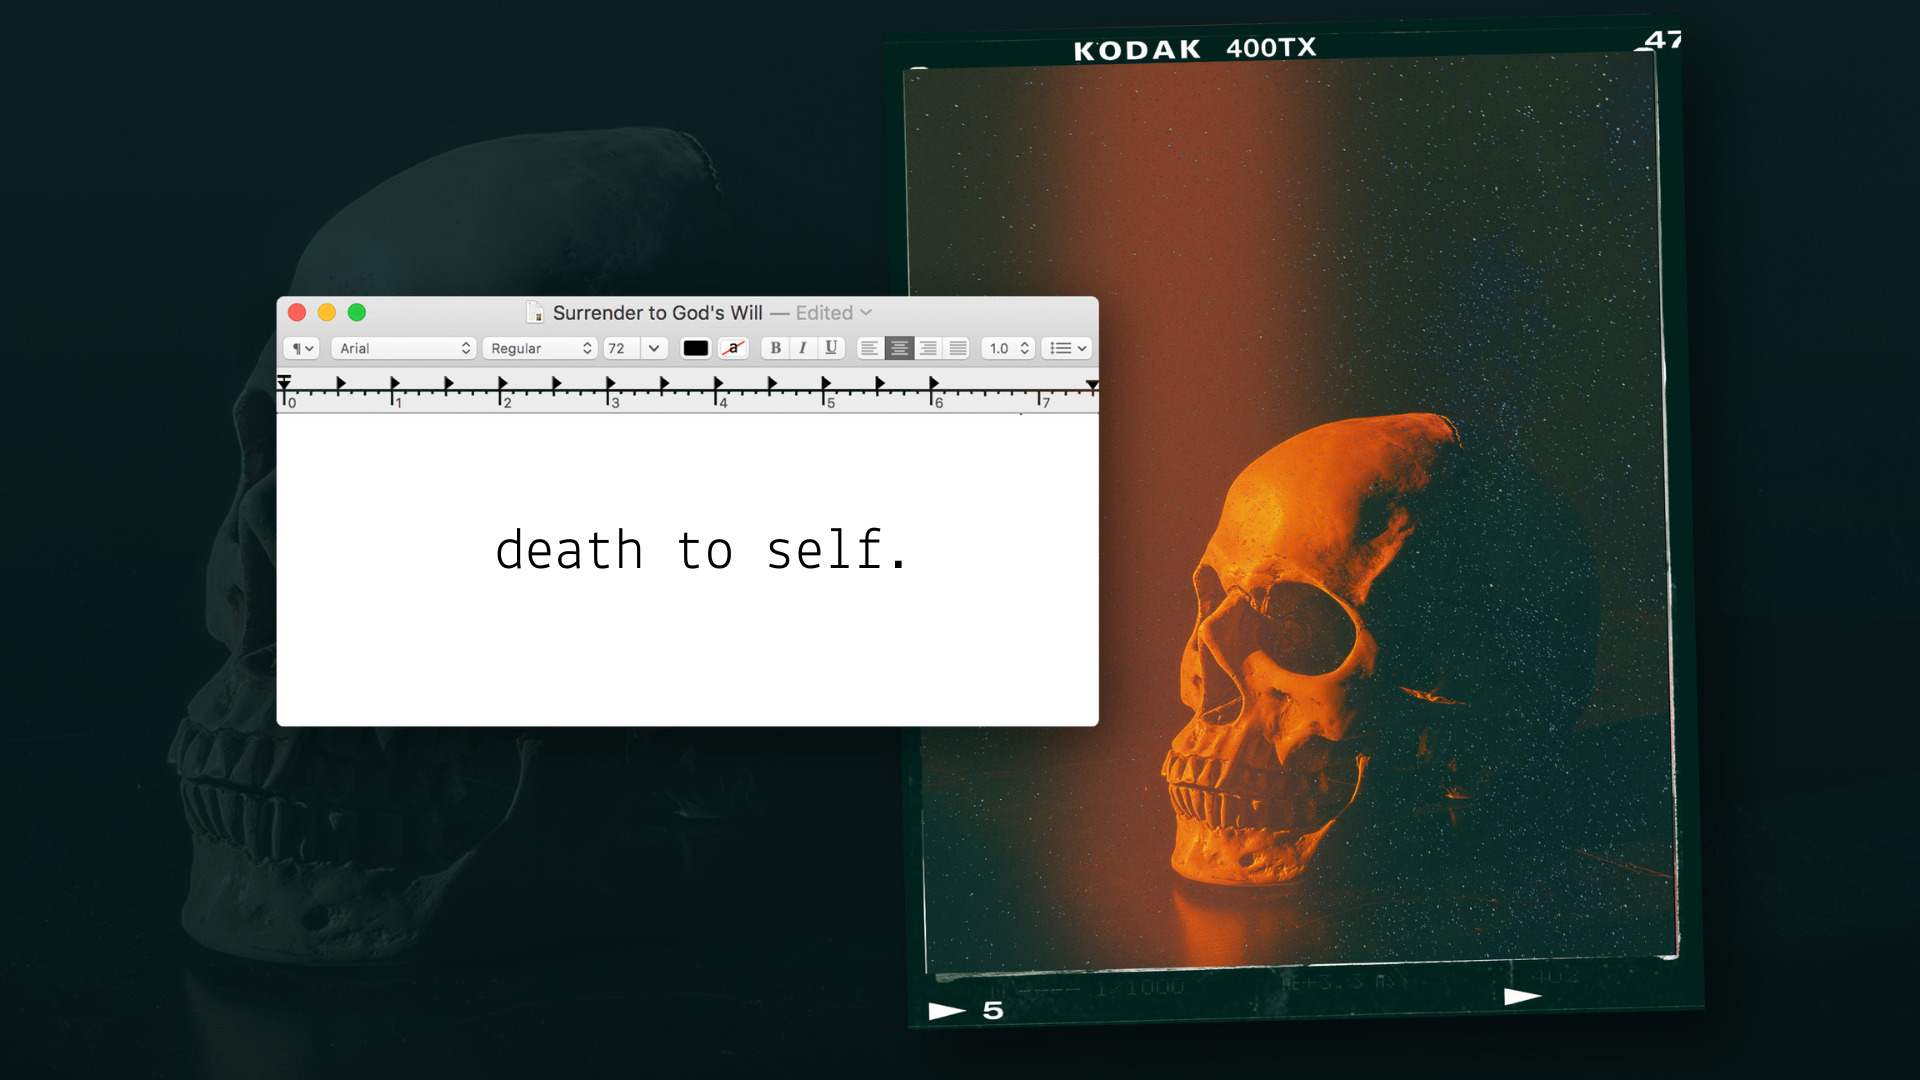 Death To Self 4K 3840 × 2160 Px | Remix Church Media | Editable Design Templates And Resources Made For The Church.